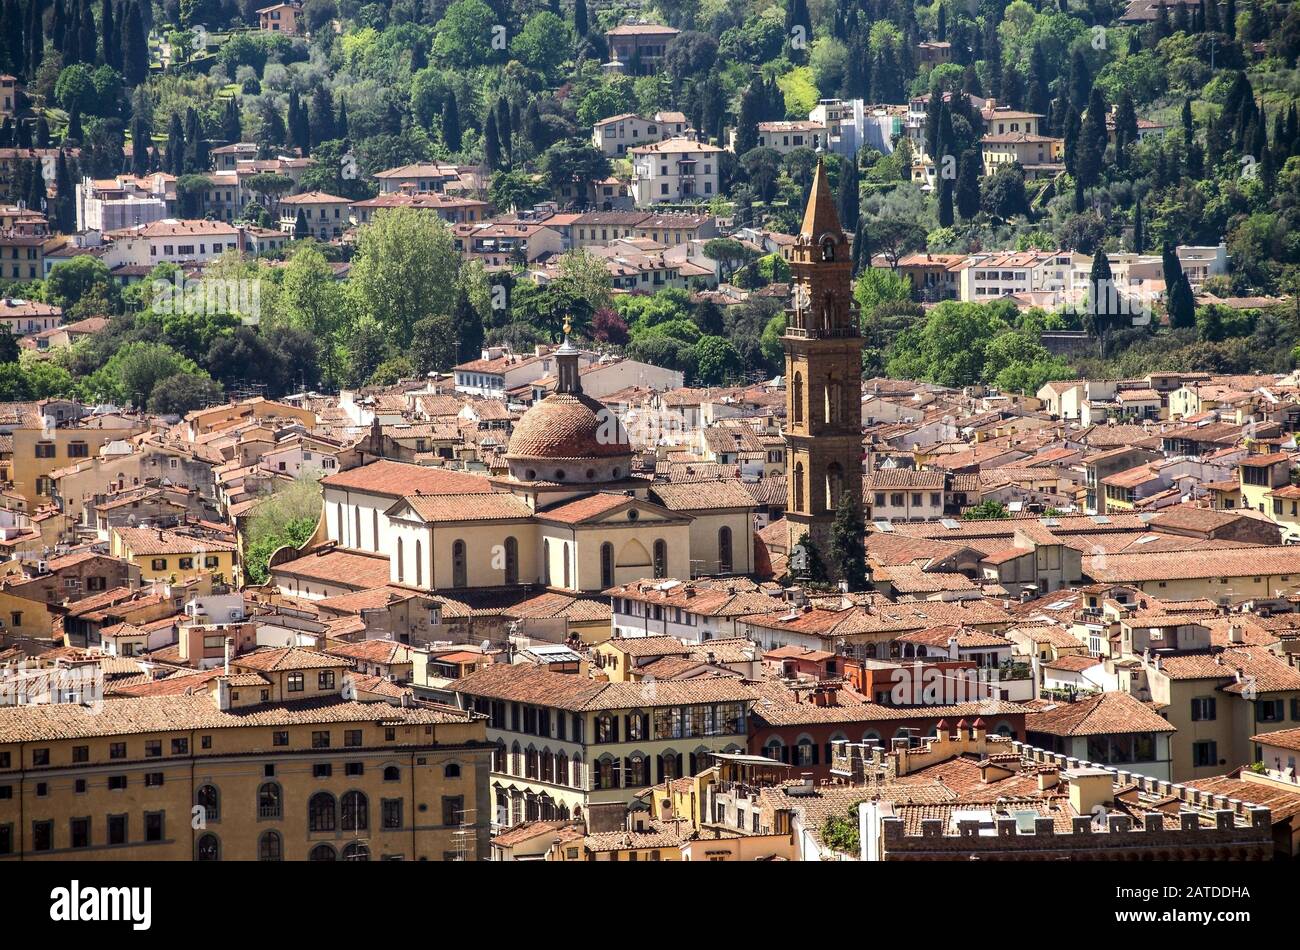 Tower of palazzo vecchio in florence top view to roofs old town Stock Photo